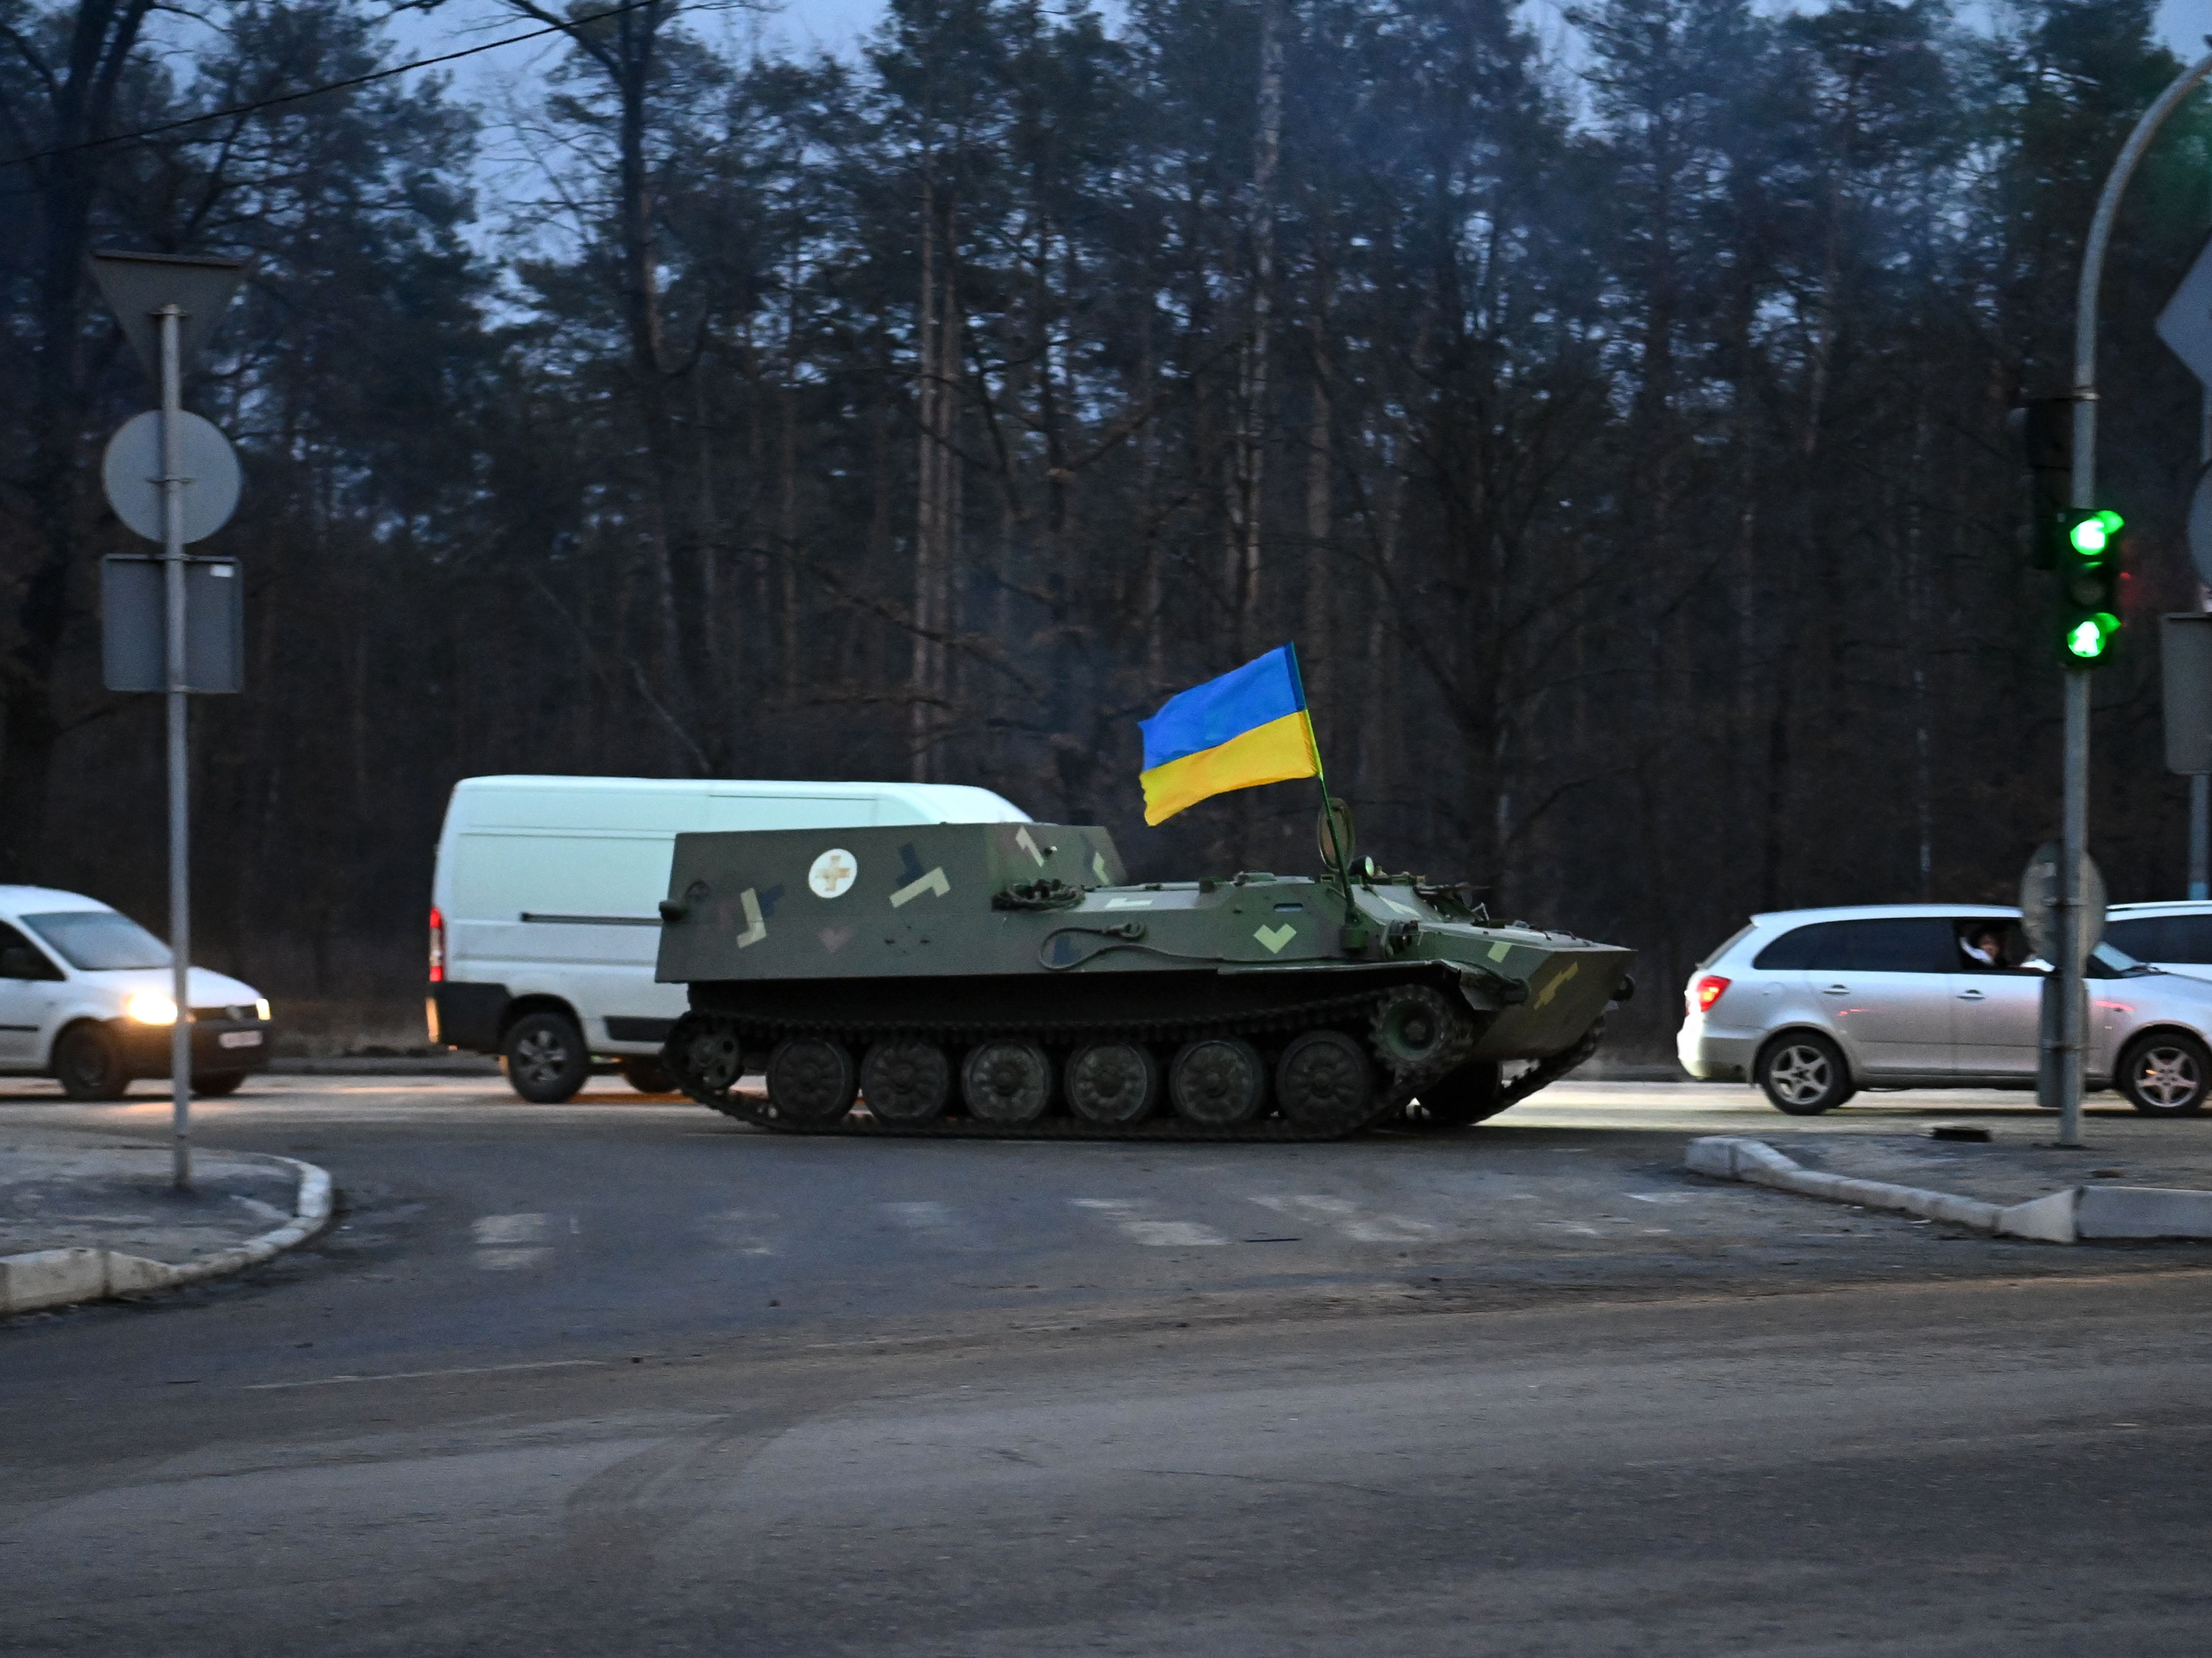 An armored medical evacuation vehicle, bearing the Ukrainian flag, on the road in northwest Kyiv on 24 February 2022